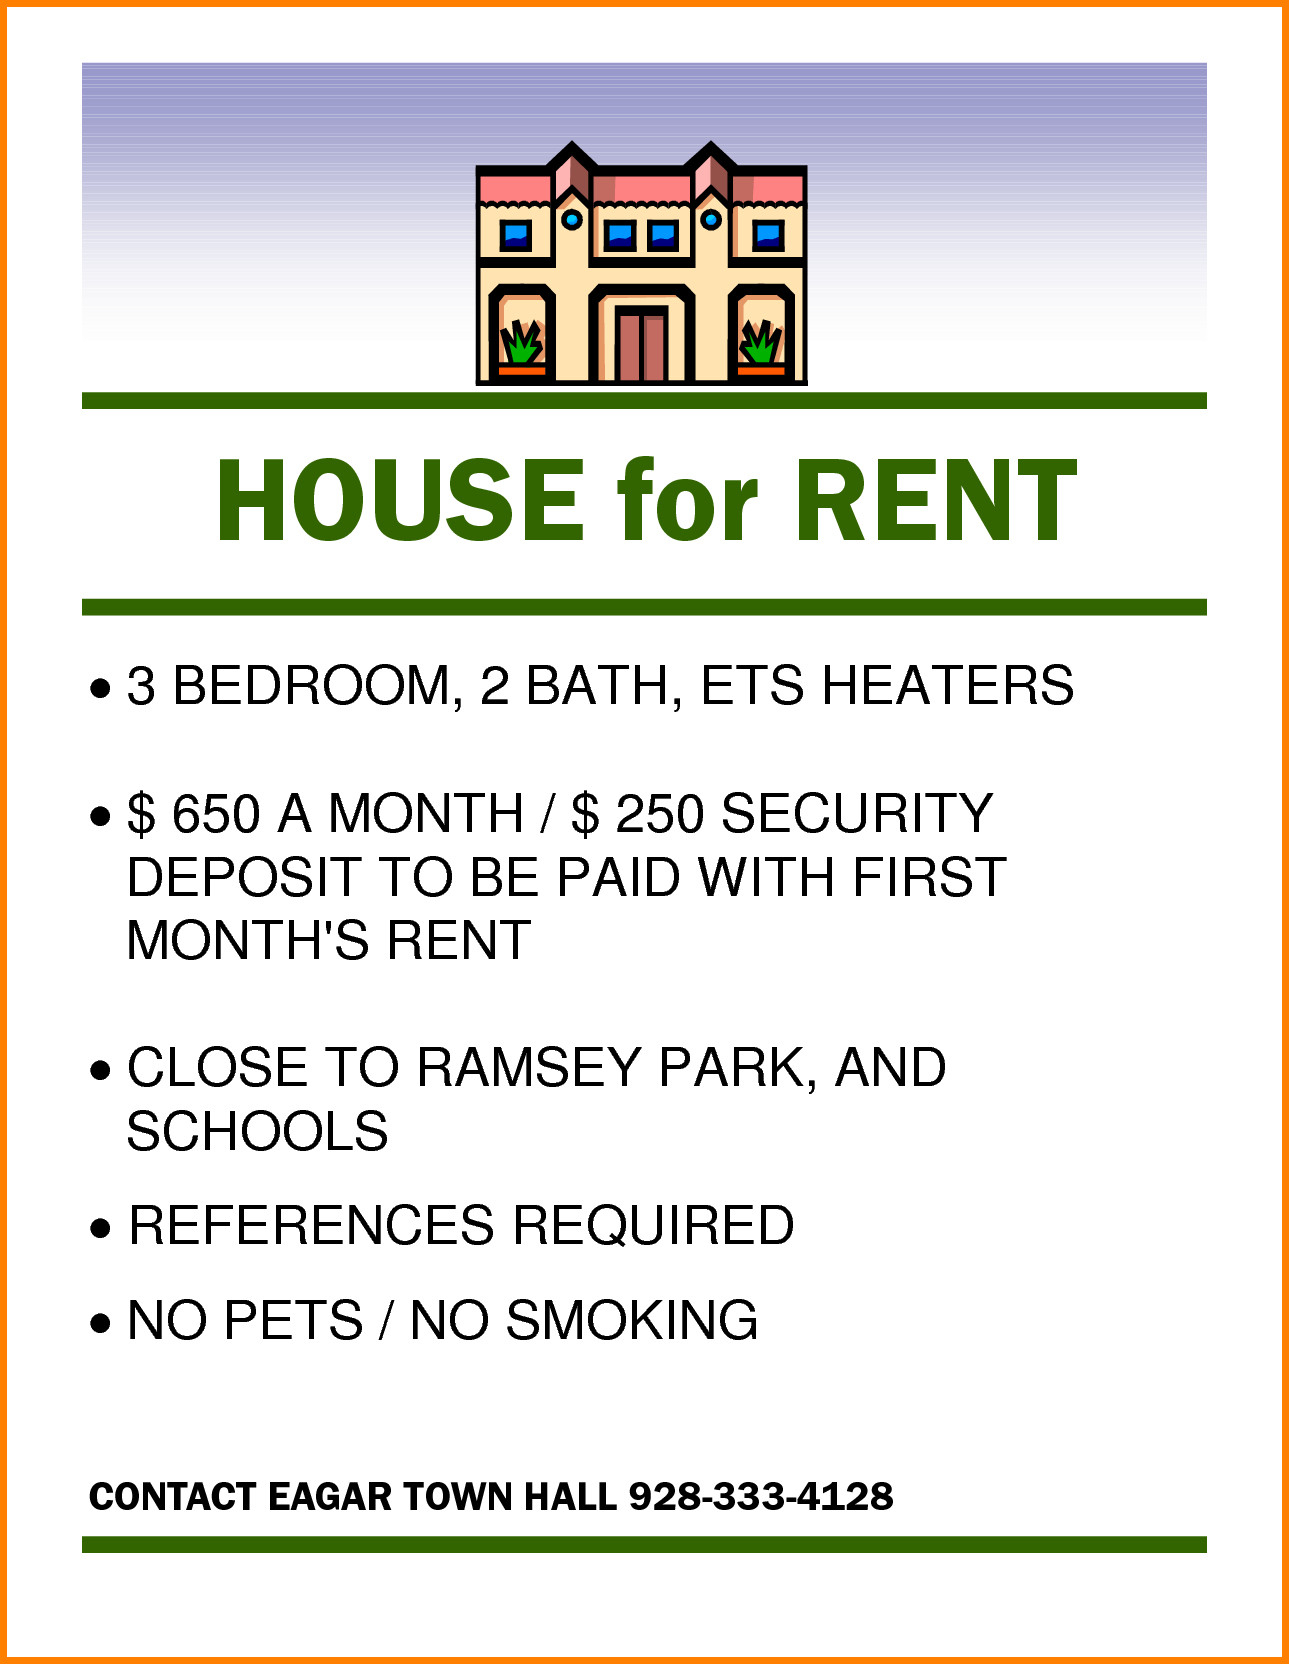 For Rent Flyer Template Awesome Home Rental Flyer Red For House Rental Flyer Template